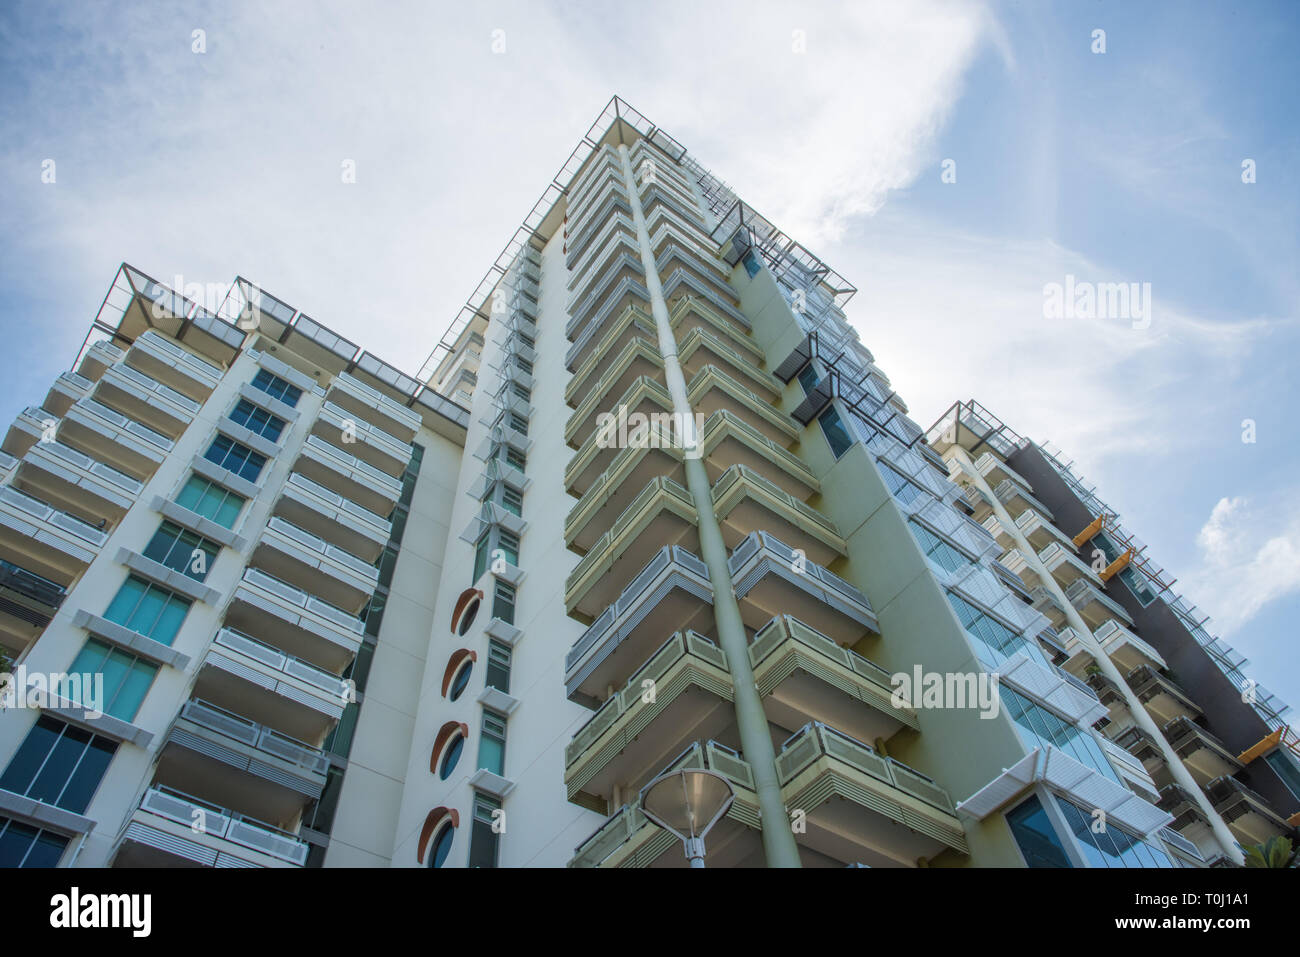 Darwin, Northern Territory, Australia-December 22,2017: 130 Esplanade apartments under a blue sky with clouds in downtown Darwin, Australia Stock Photo